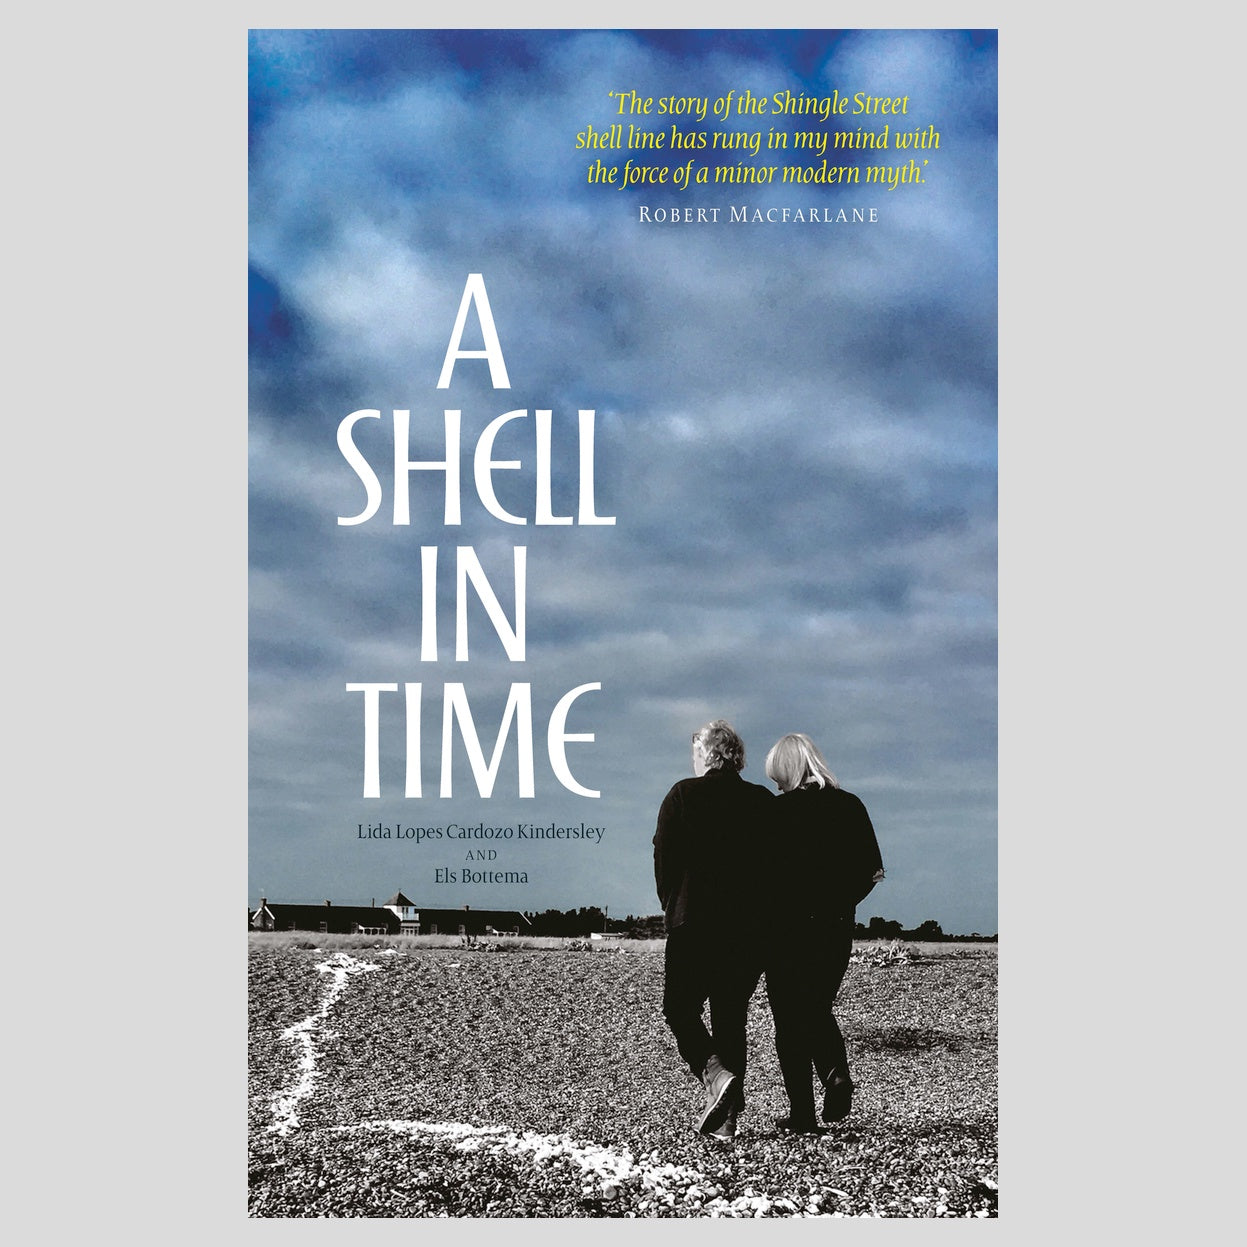 A Shell in Time